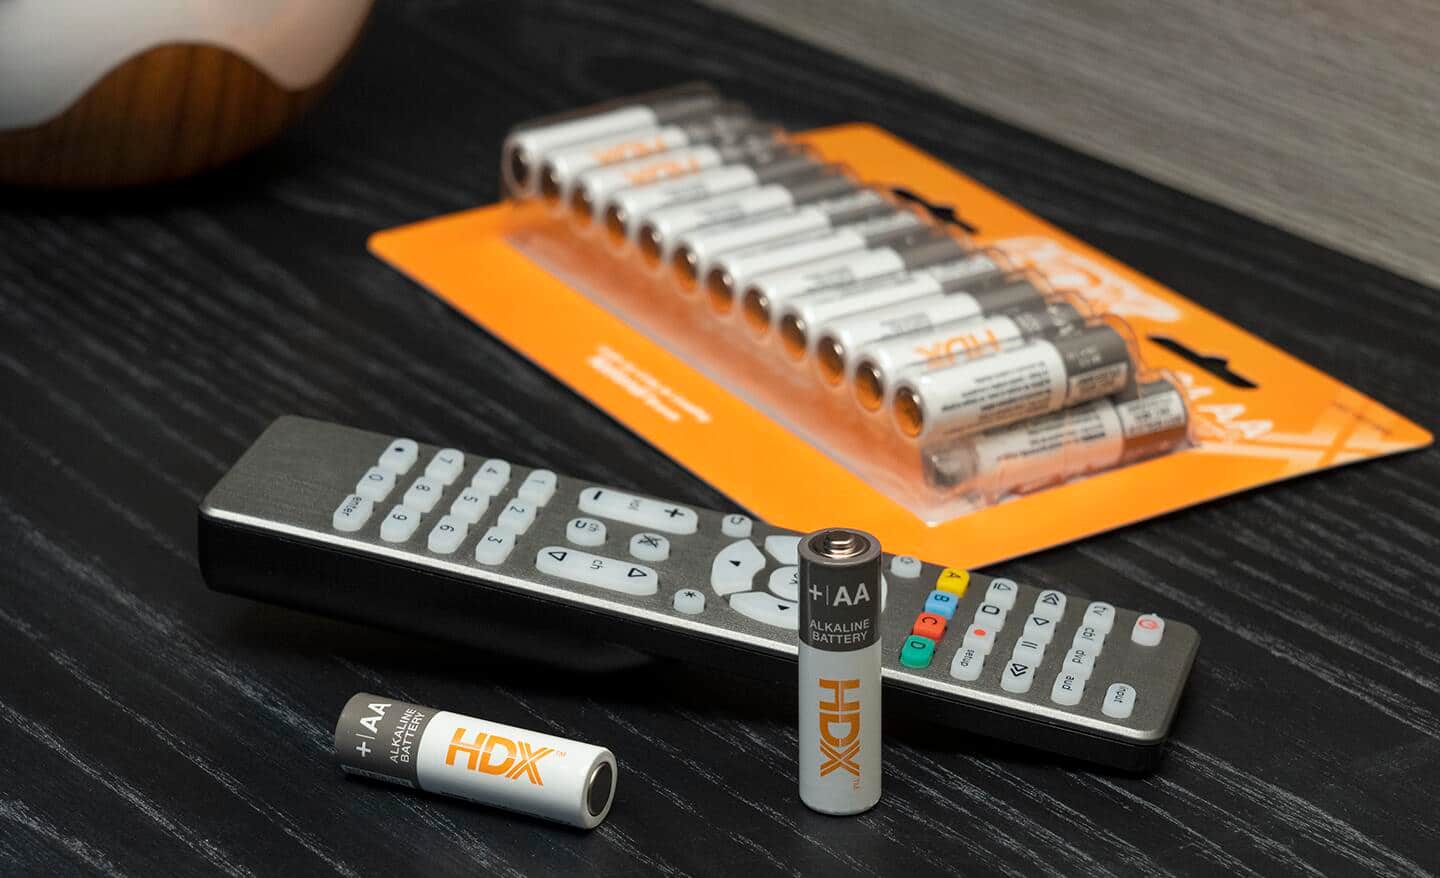 A package of AA batteries lying next to a TV remote control.